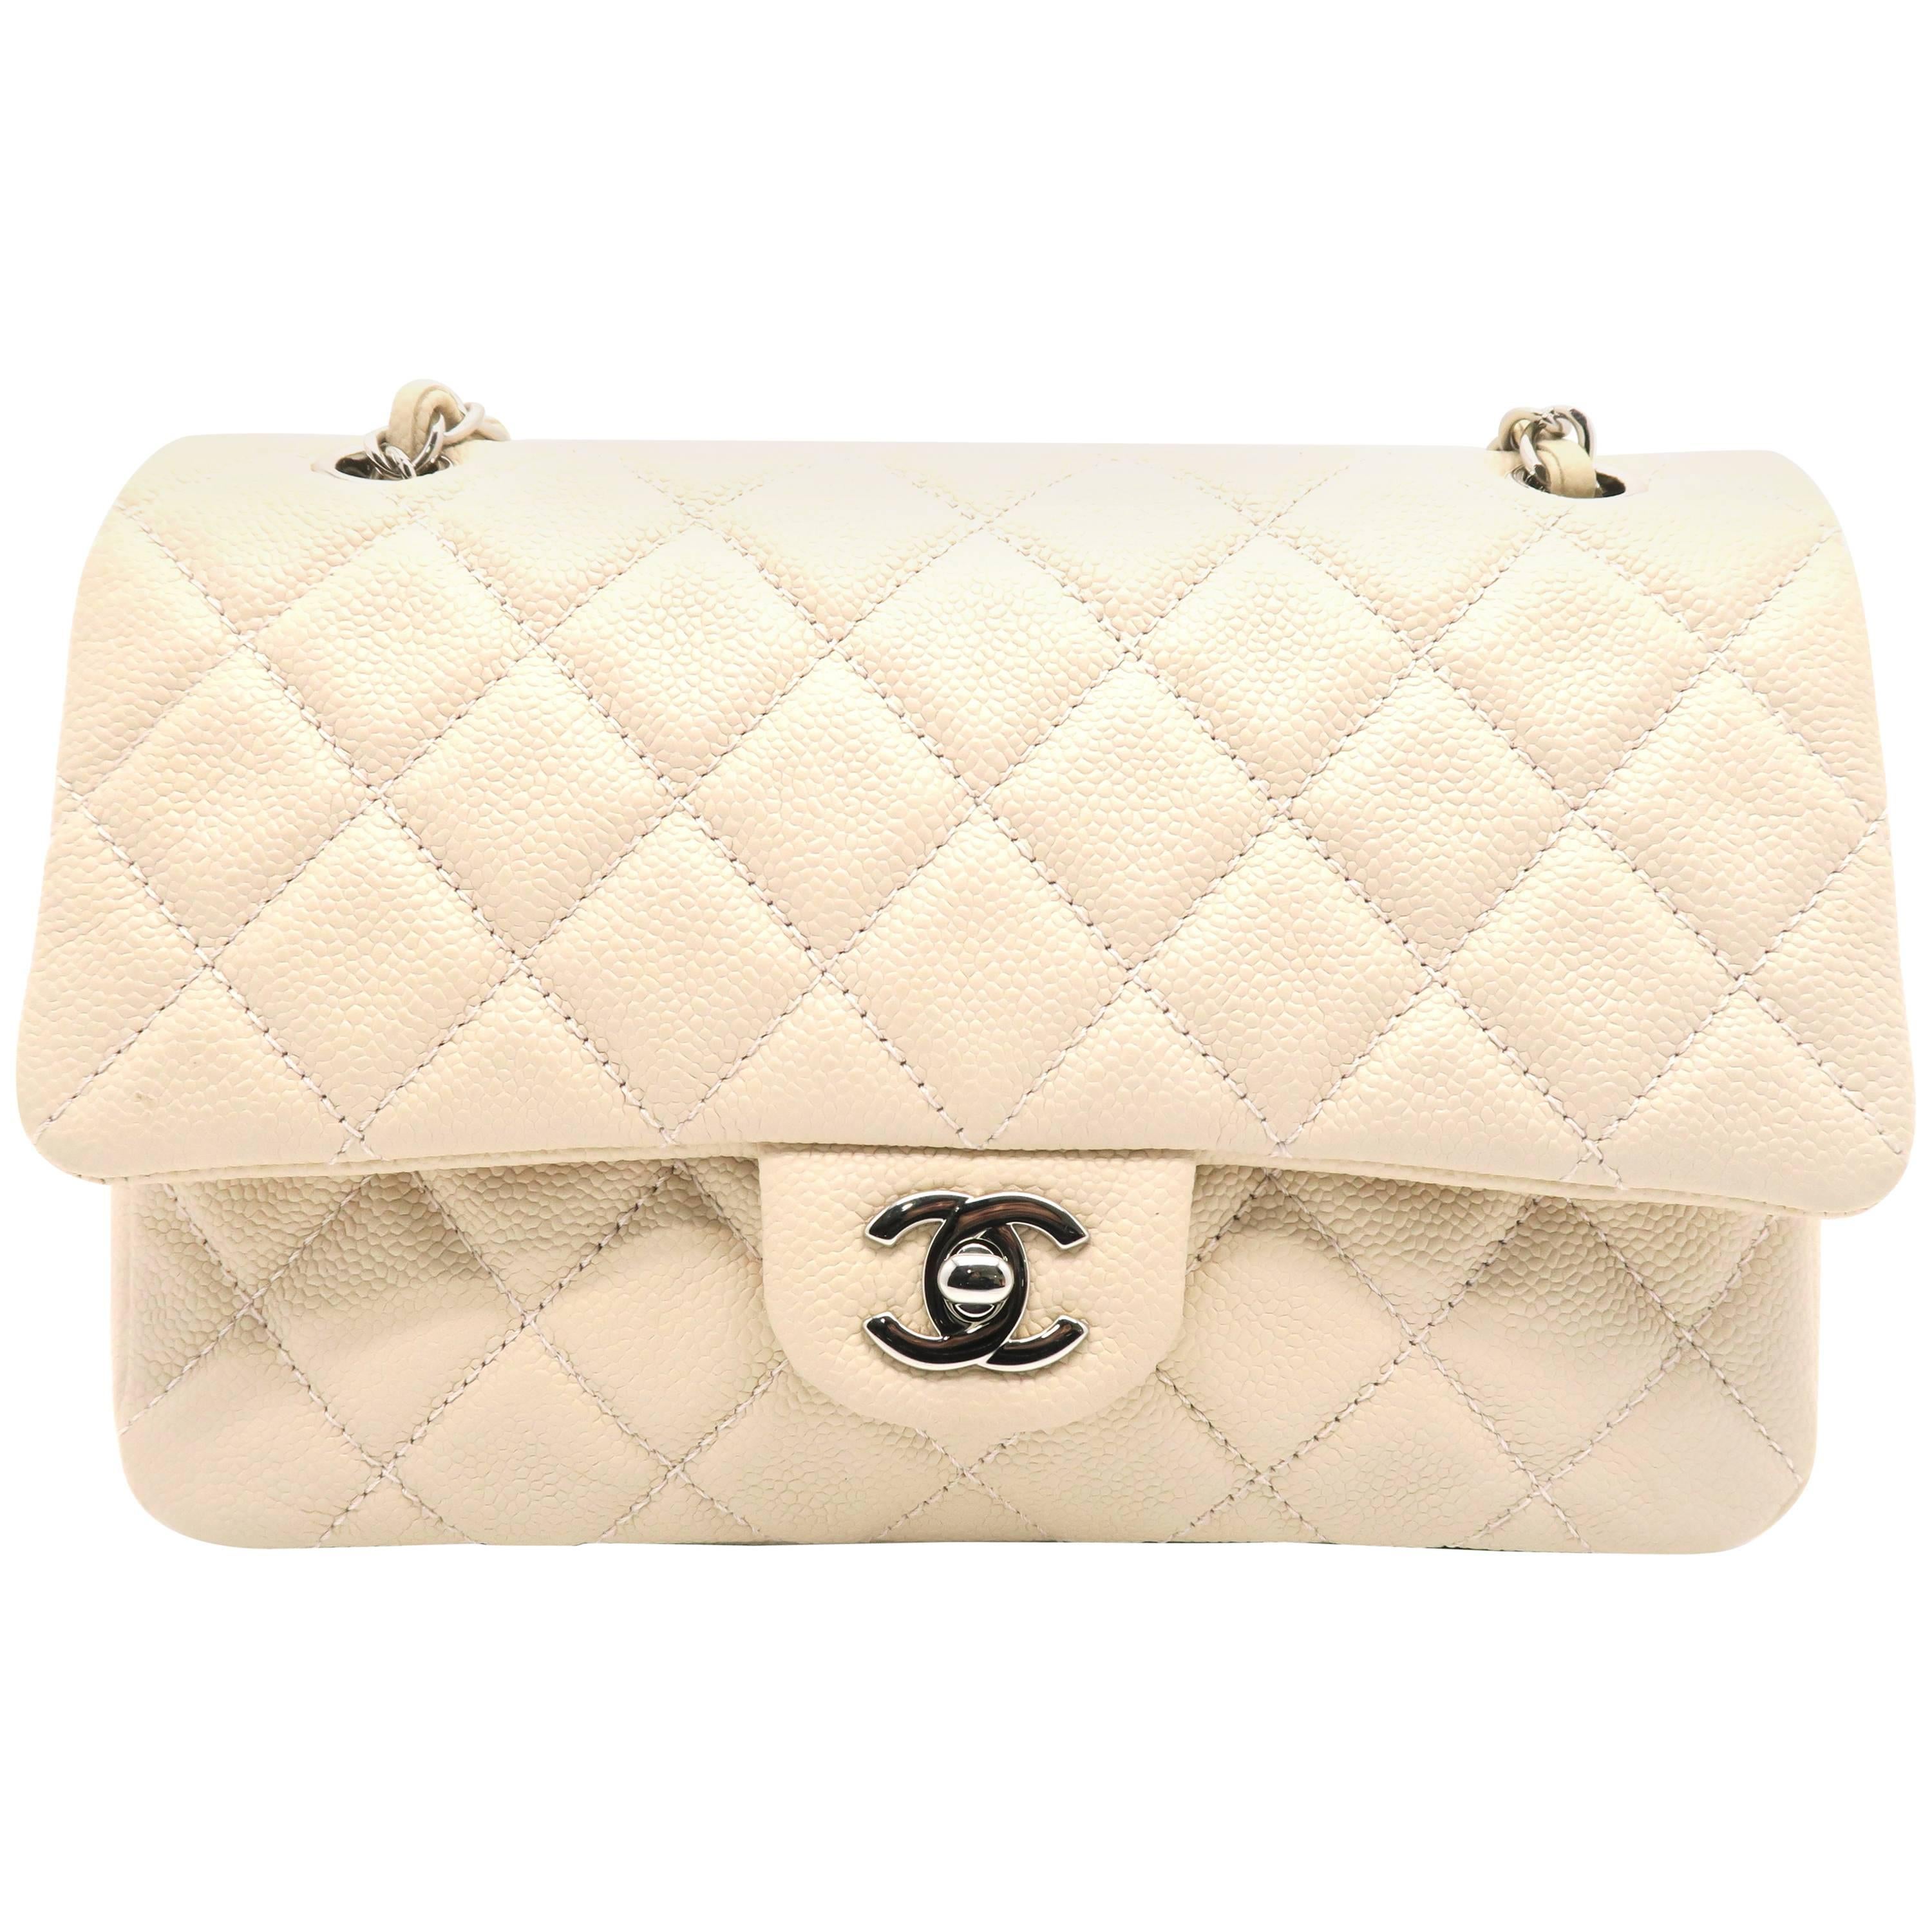 Chanel Light Pink Quilted Caviar Leather Silver Metal Chain Shoulder Flap Bag